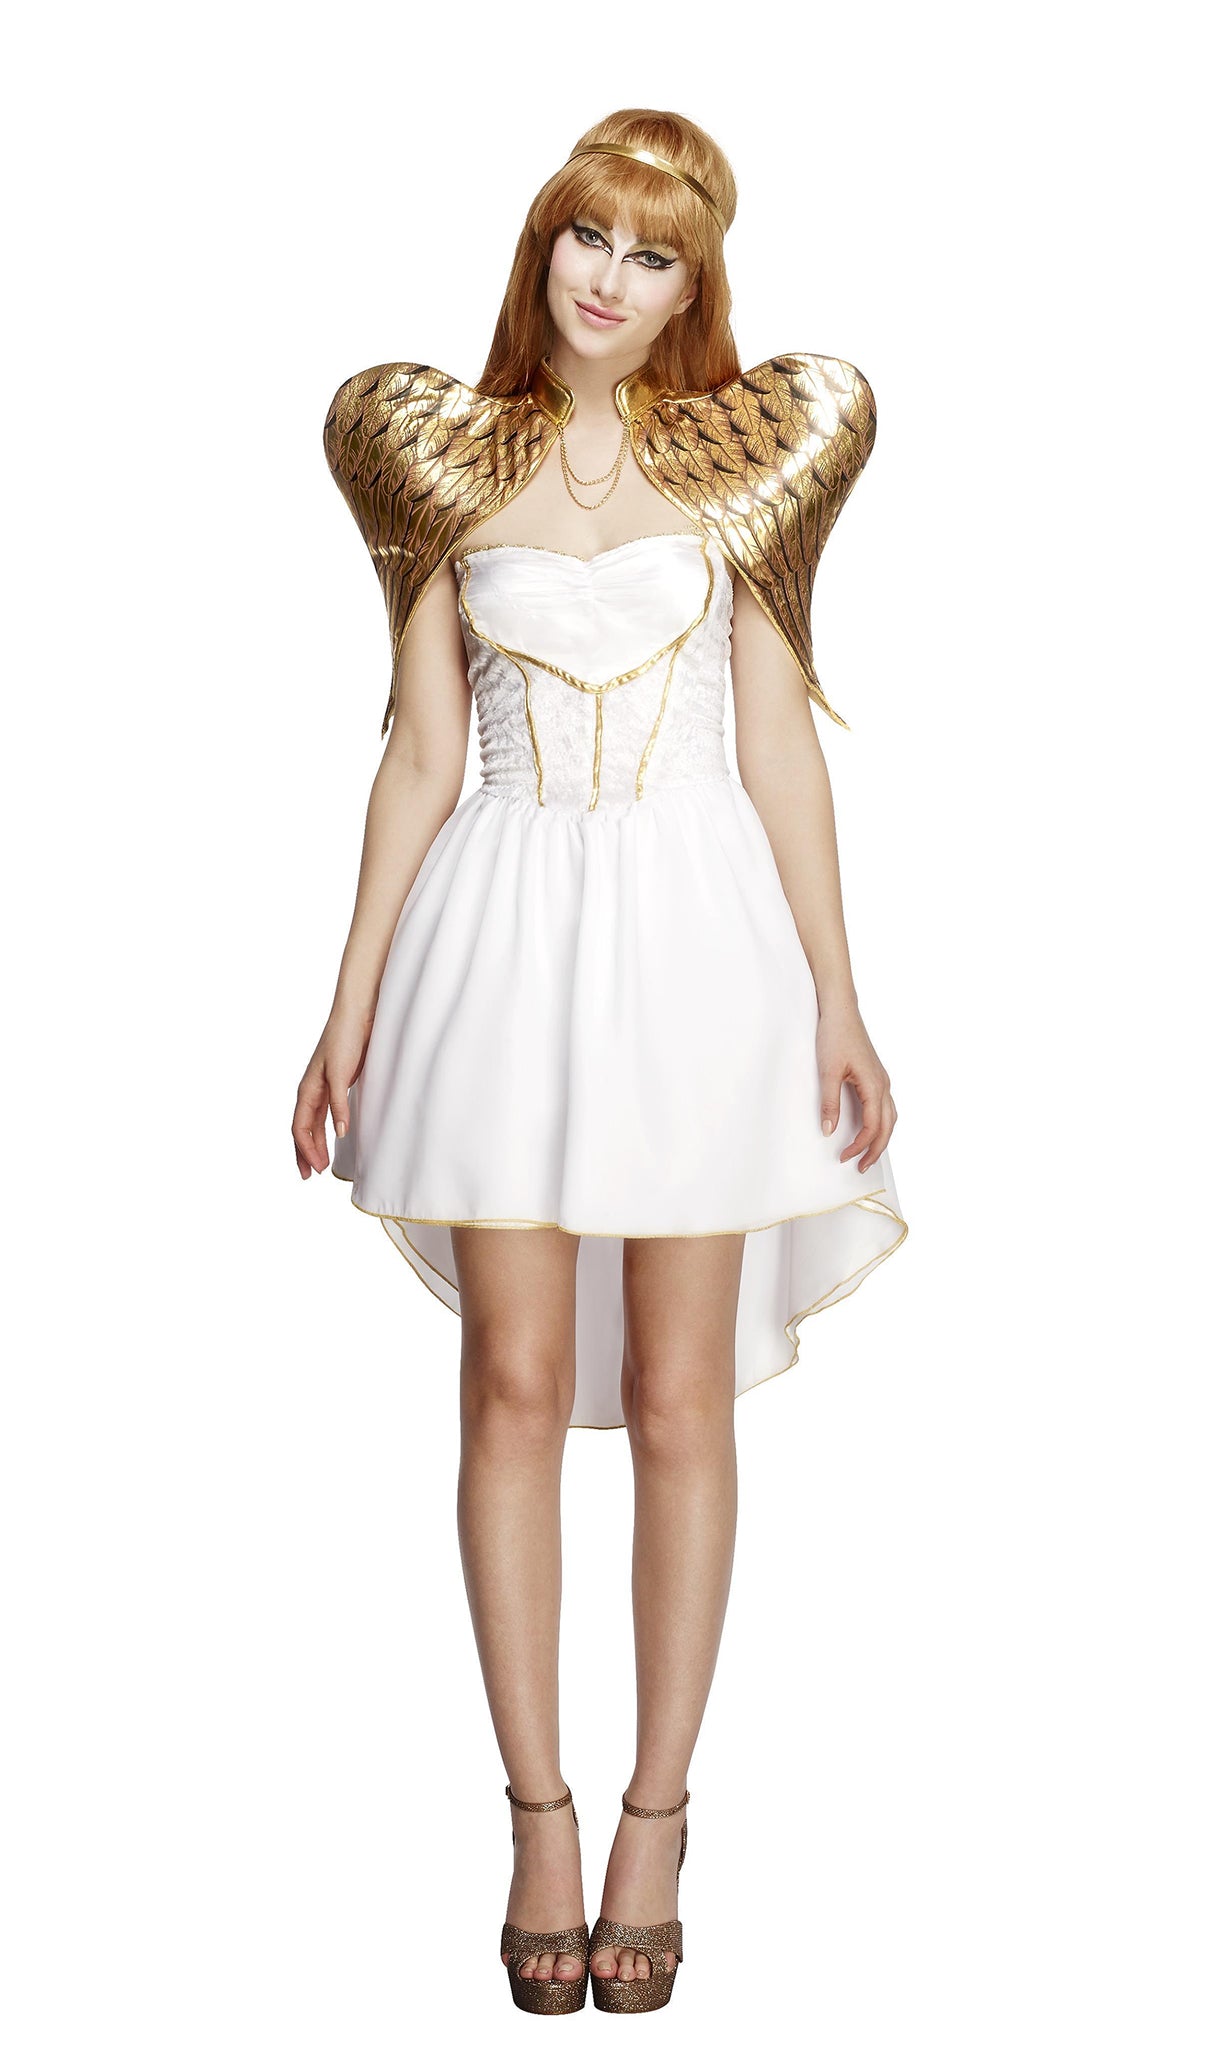 Short white Angel costume with headband and gold wings